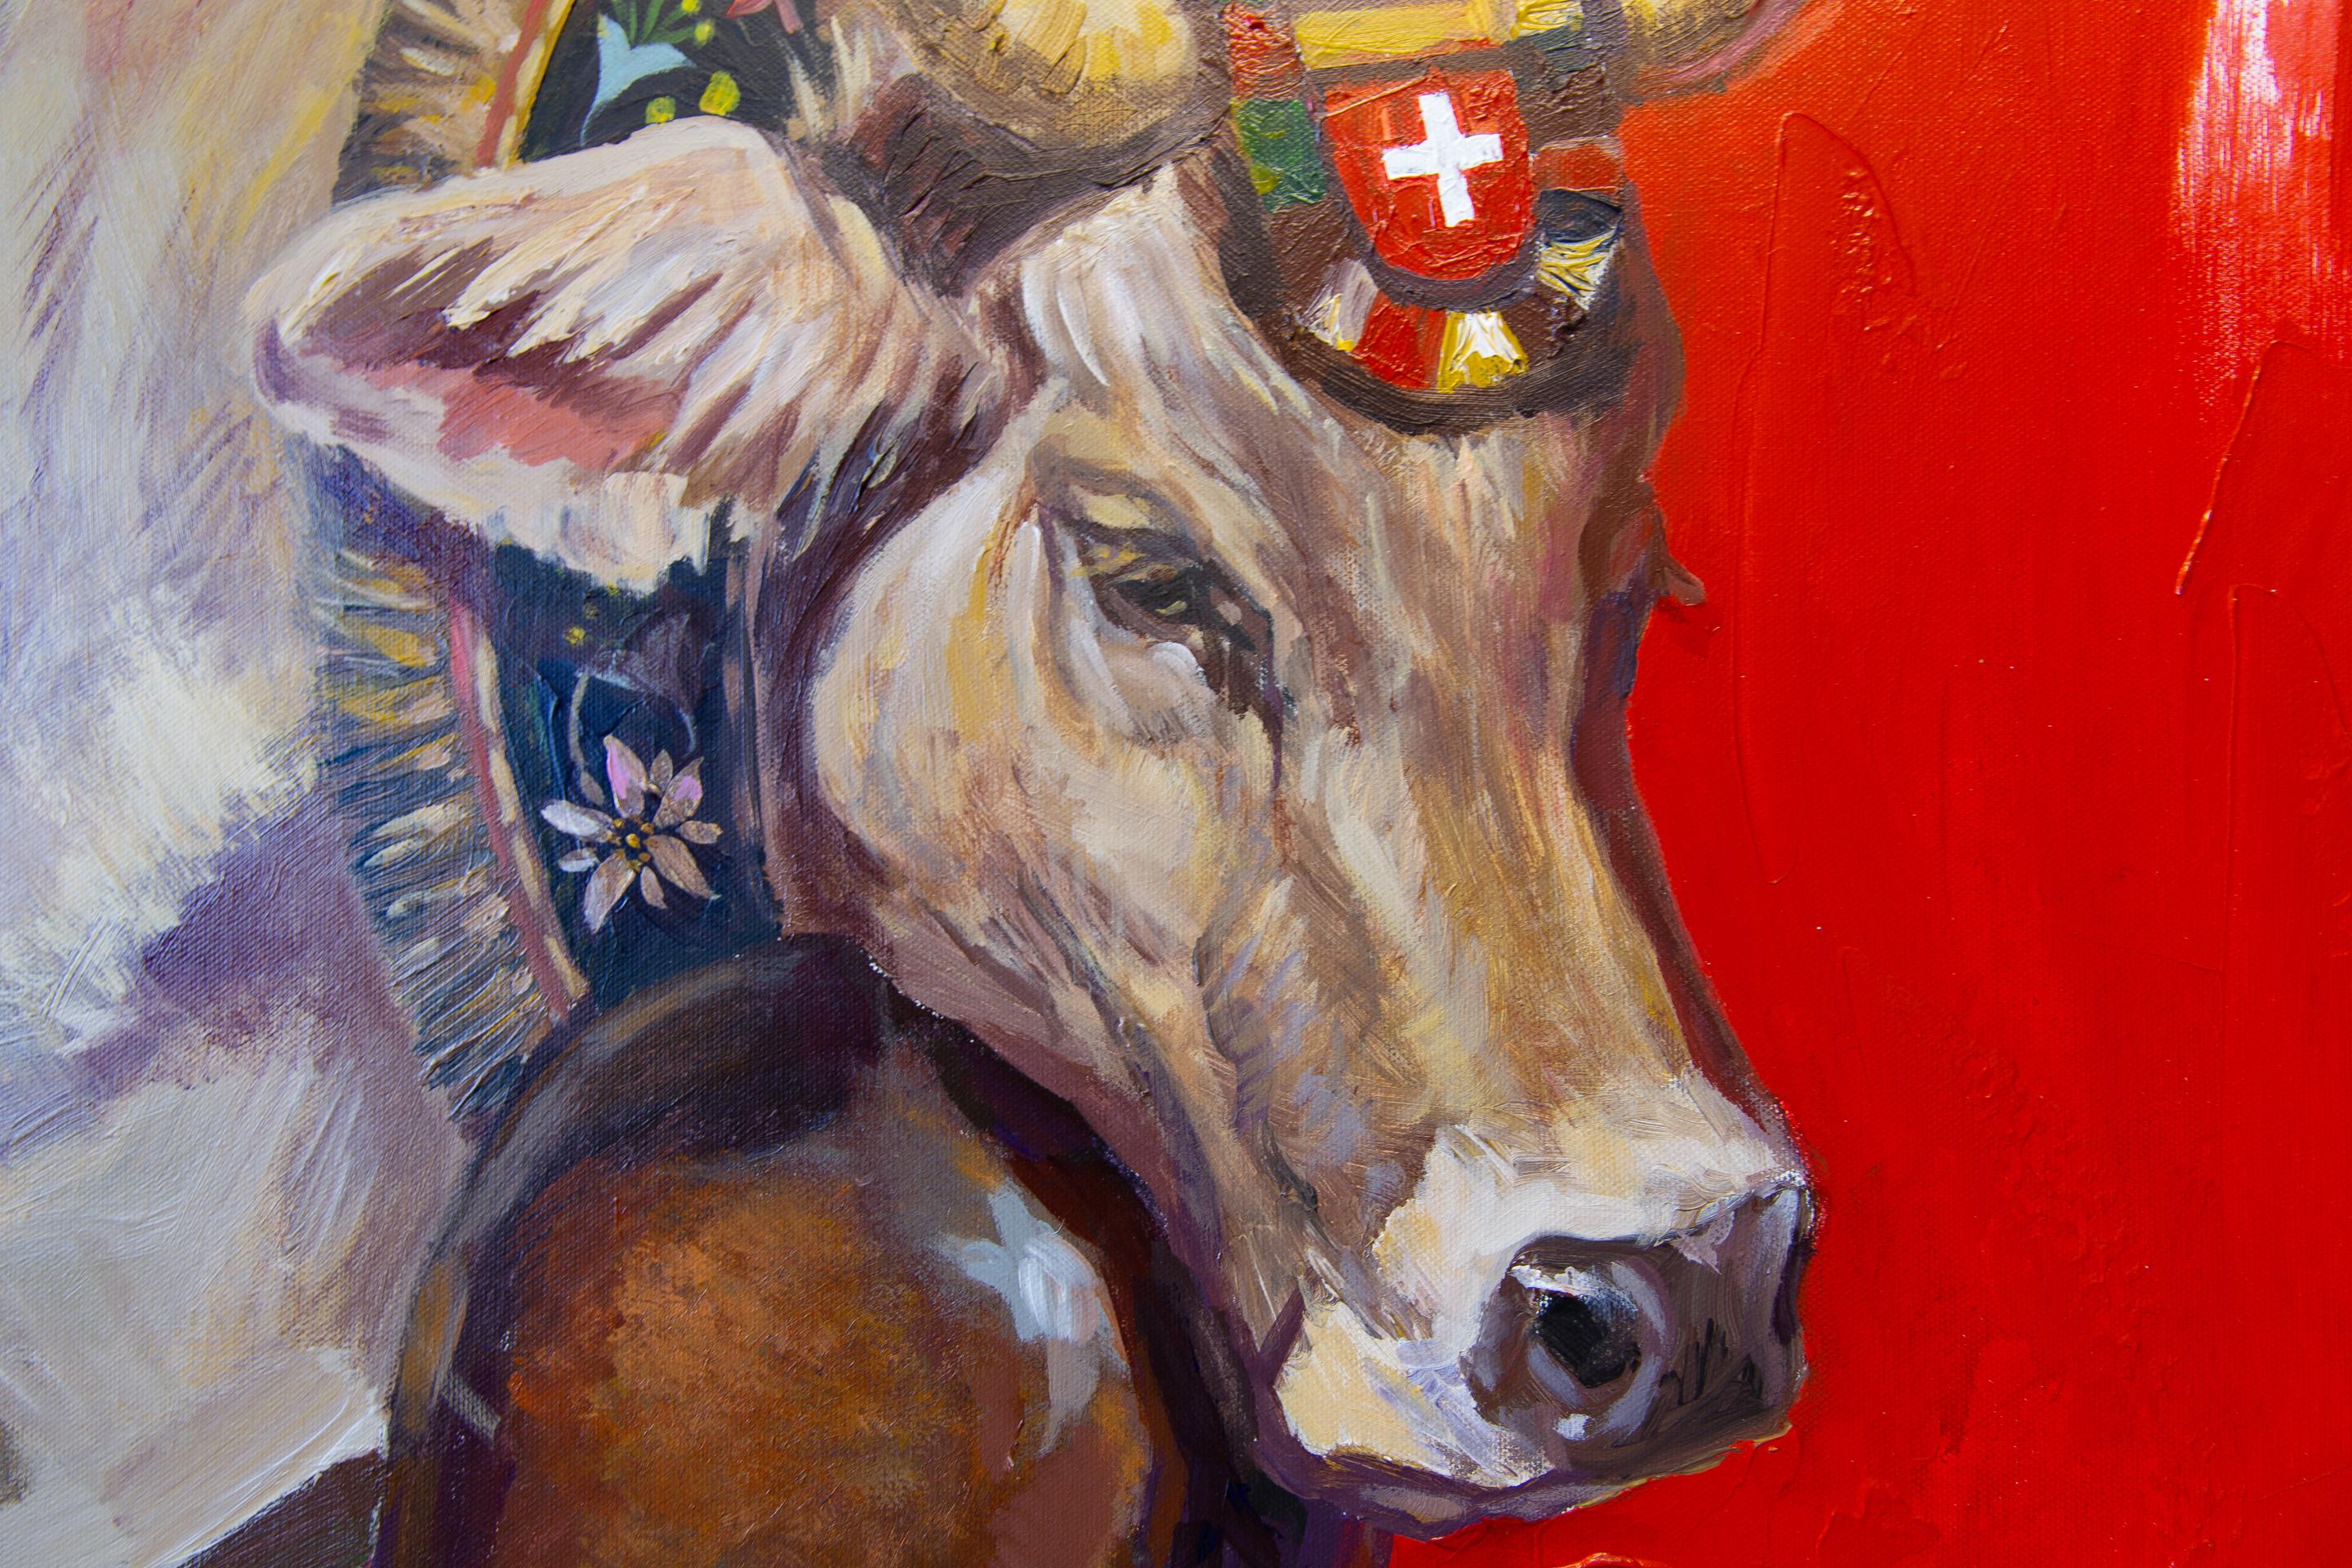 In autumn, Swiss cows return from the mountain meadows to the valleys. They carry upside-down milking stools decorated with flowers. The cows walk in friendly rows and ring their bells. This is an indescribable spectacle that attracts spectators